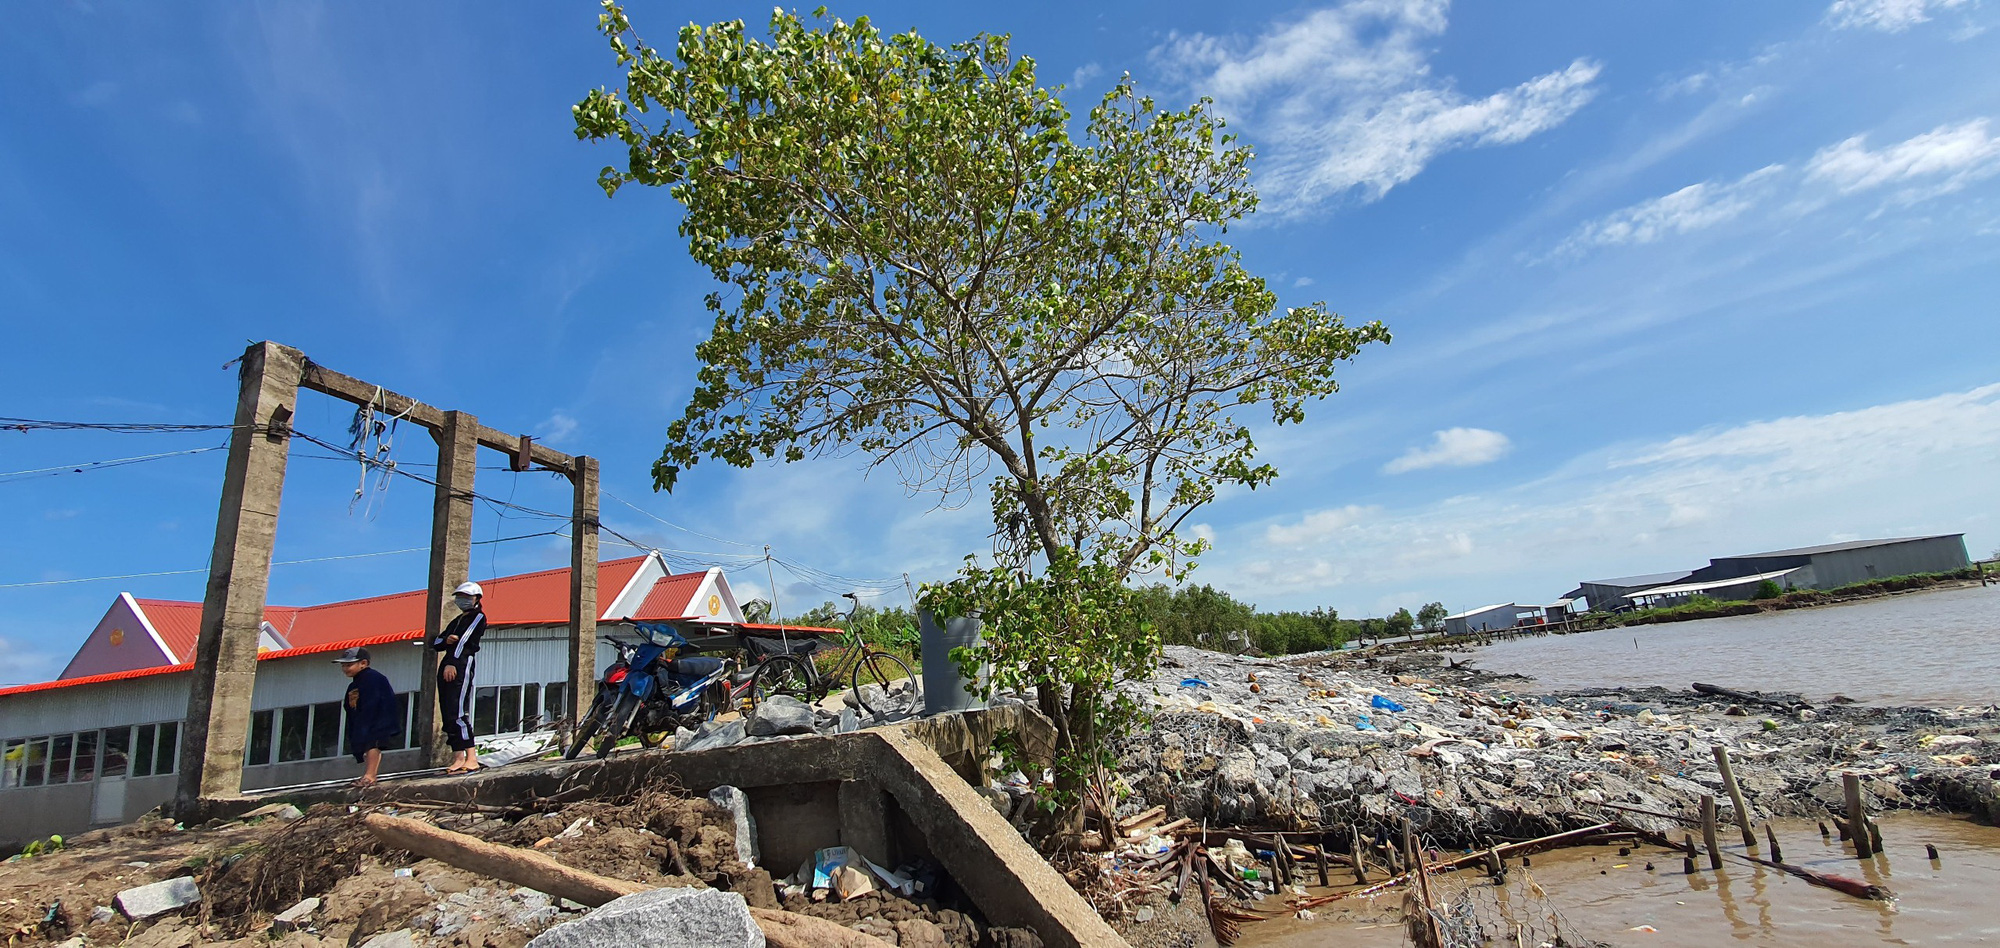 A residential area affected by coastal erosion in Ca Mau Province, Vietnam. Photo: Chi Quoc / Tuoi Tre